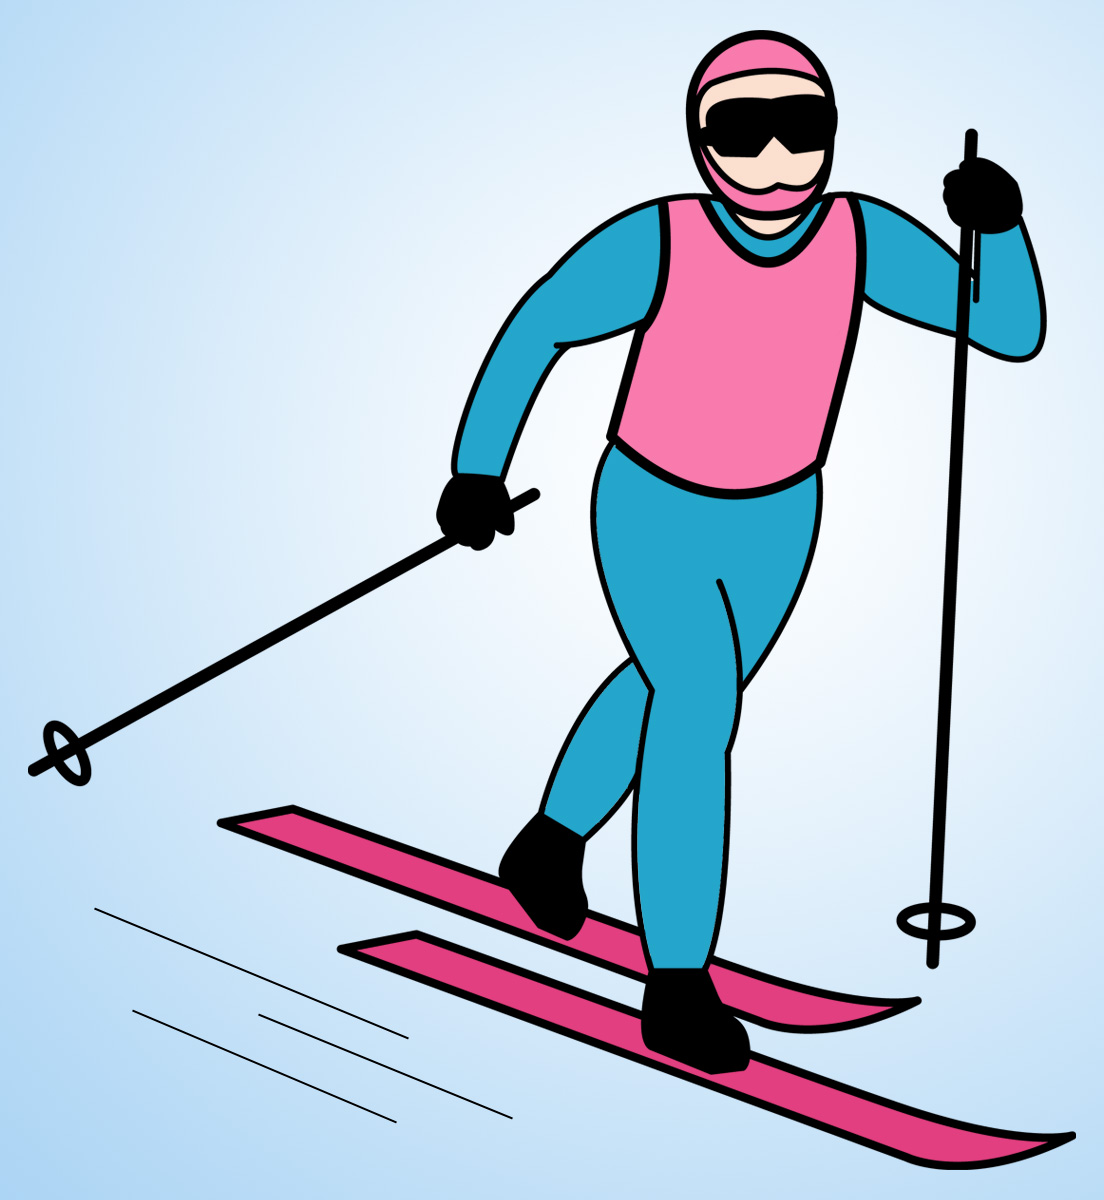 Downhill skier clipart color